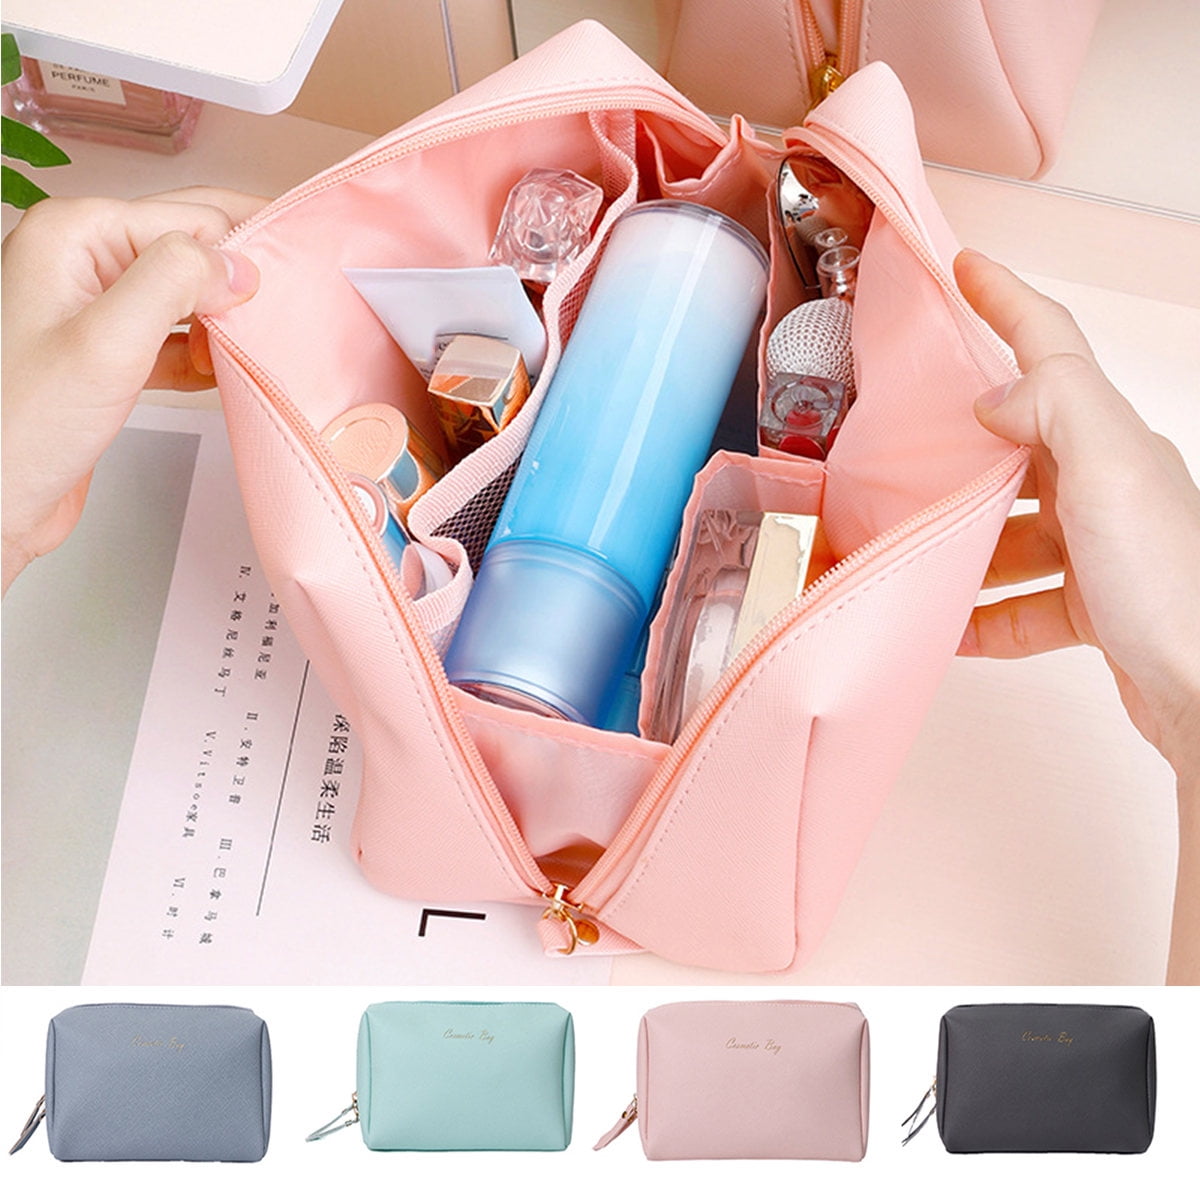 Portable Cute Small Travel Colorful Mirror Makeup Bag Cosmetic Organizer Tote Bag for Kids Women Toddler Teens Little Girls